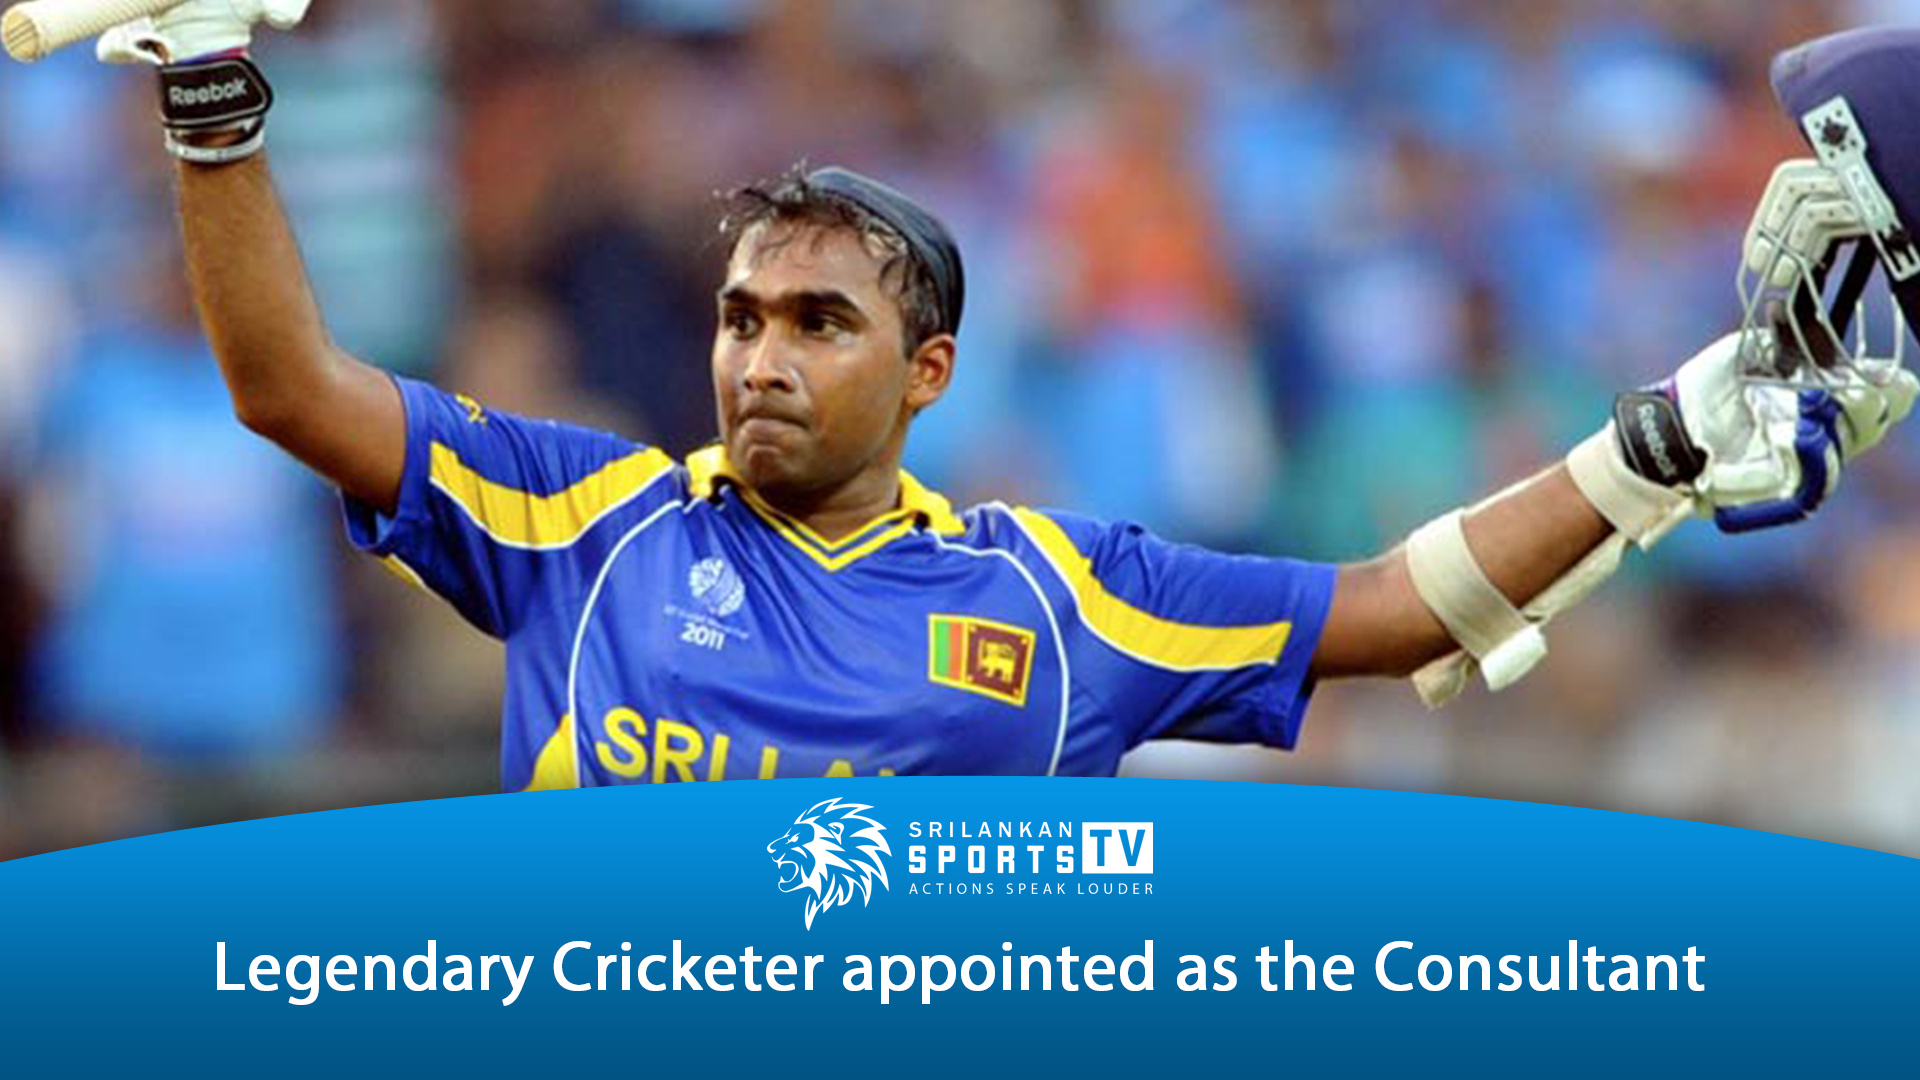 Legendary Cricketer appointed as the Consultant for National Team and U19 National Team